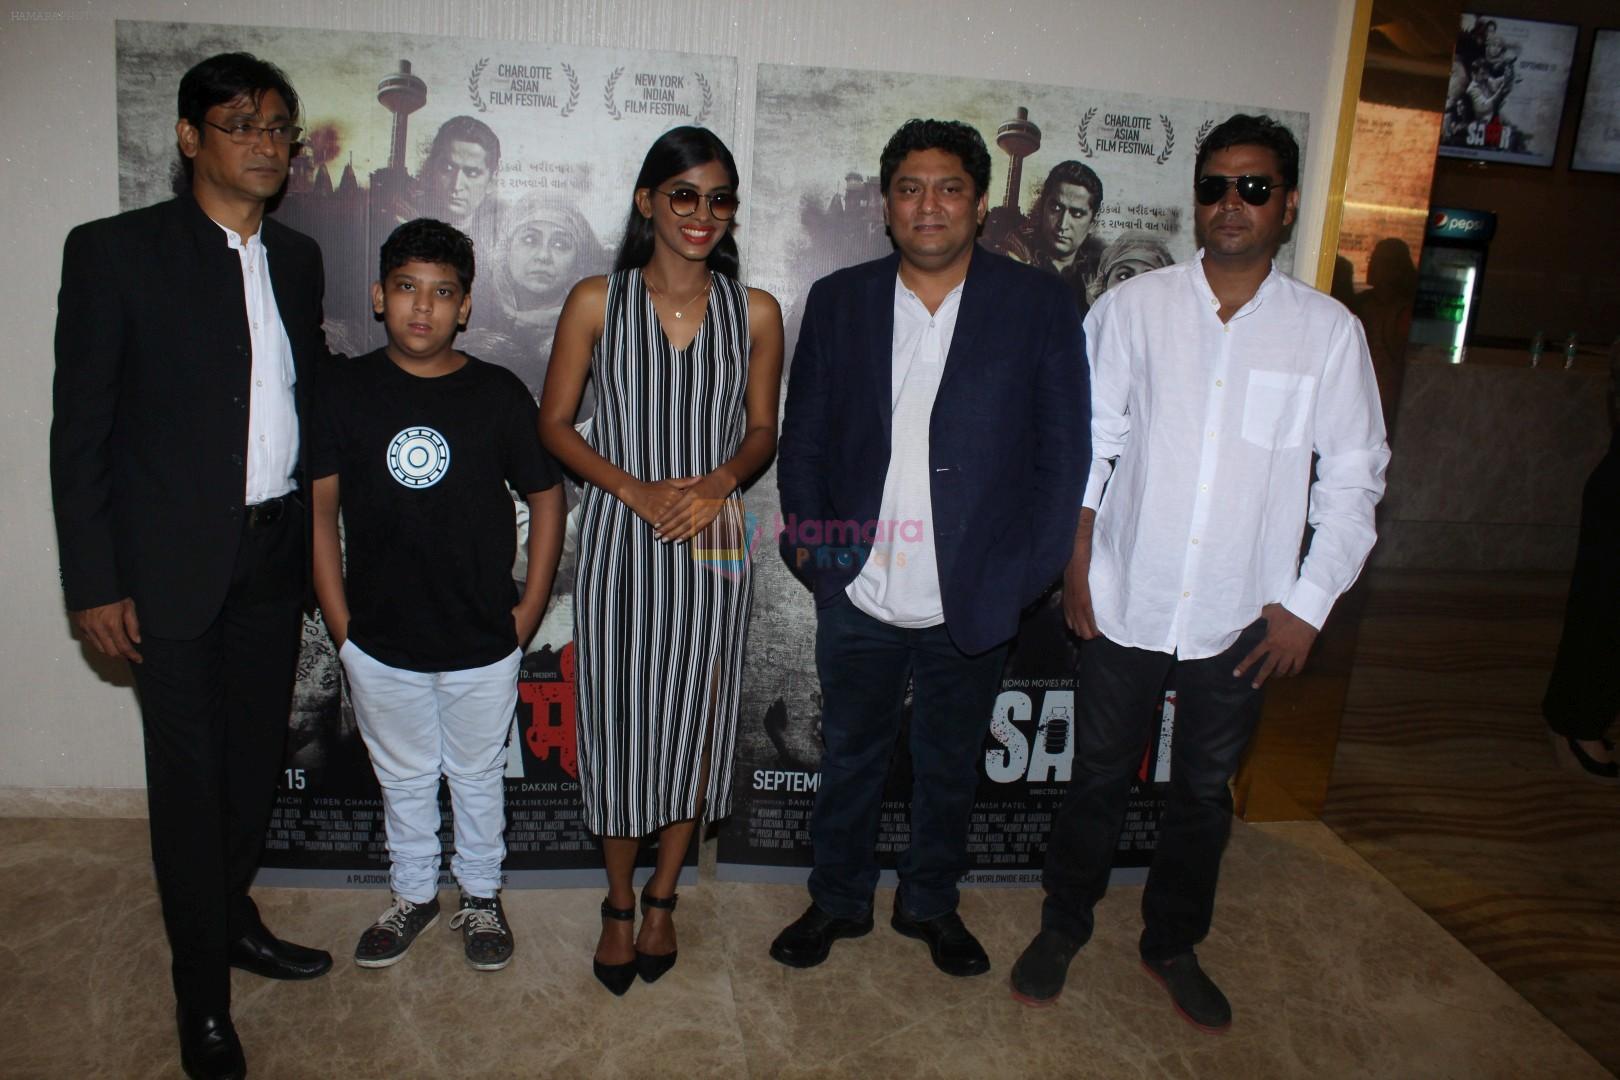 Anjali Patil, Mohammed Zeeshan Ayyub at the Trailer Launch Of Film Sameer on 11th Aug 2017